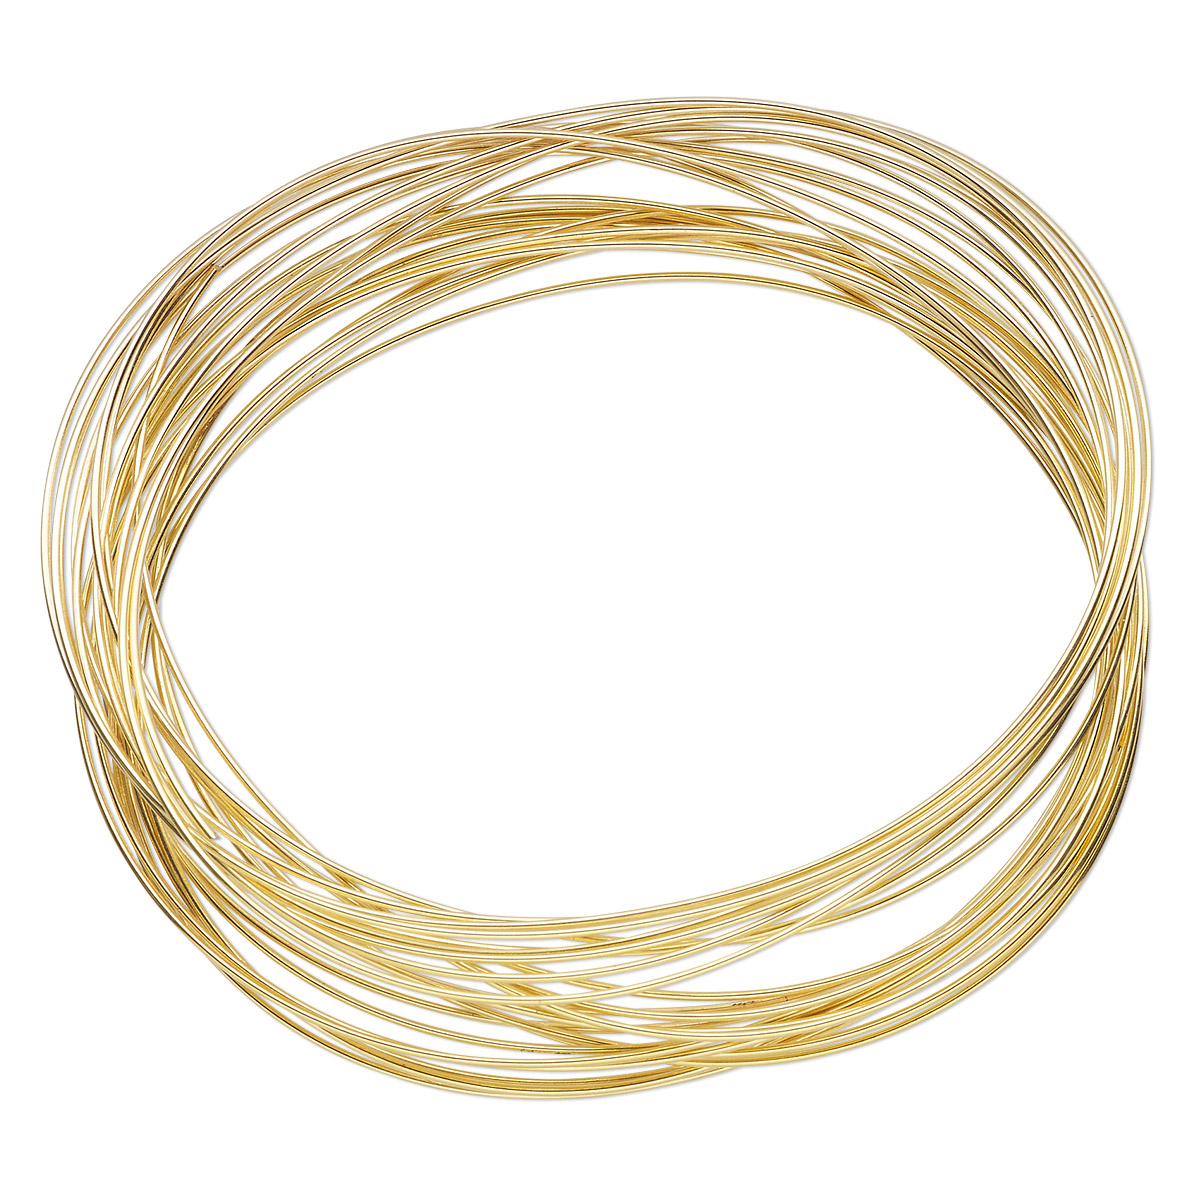 Memory wire, Beadalon®, gold-plated carbon steel, 2-1/2 x 1-3/4 inch ...